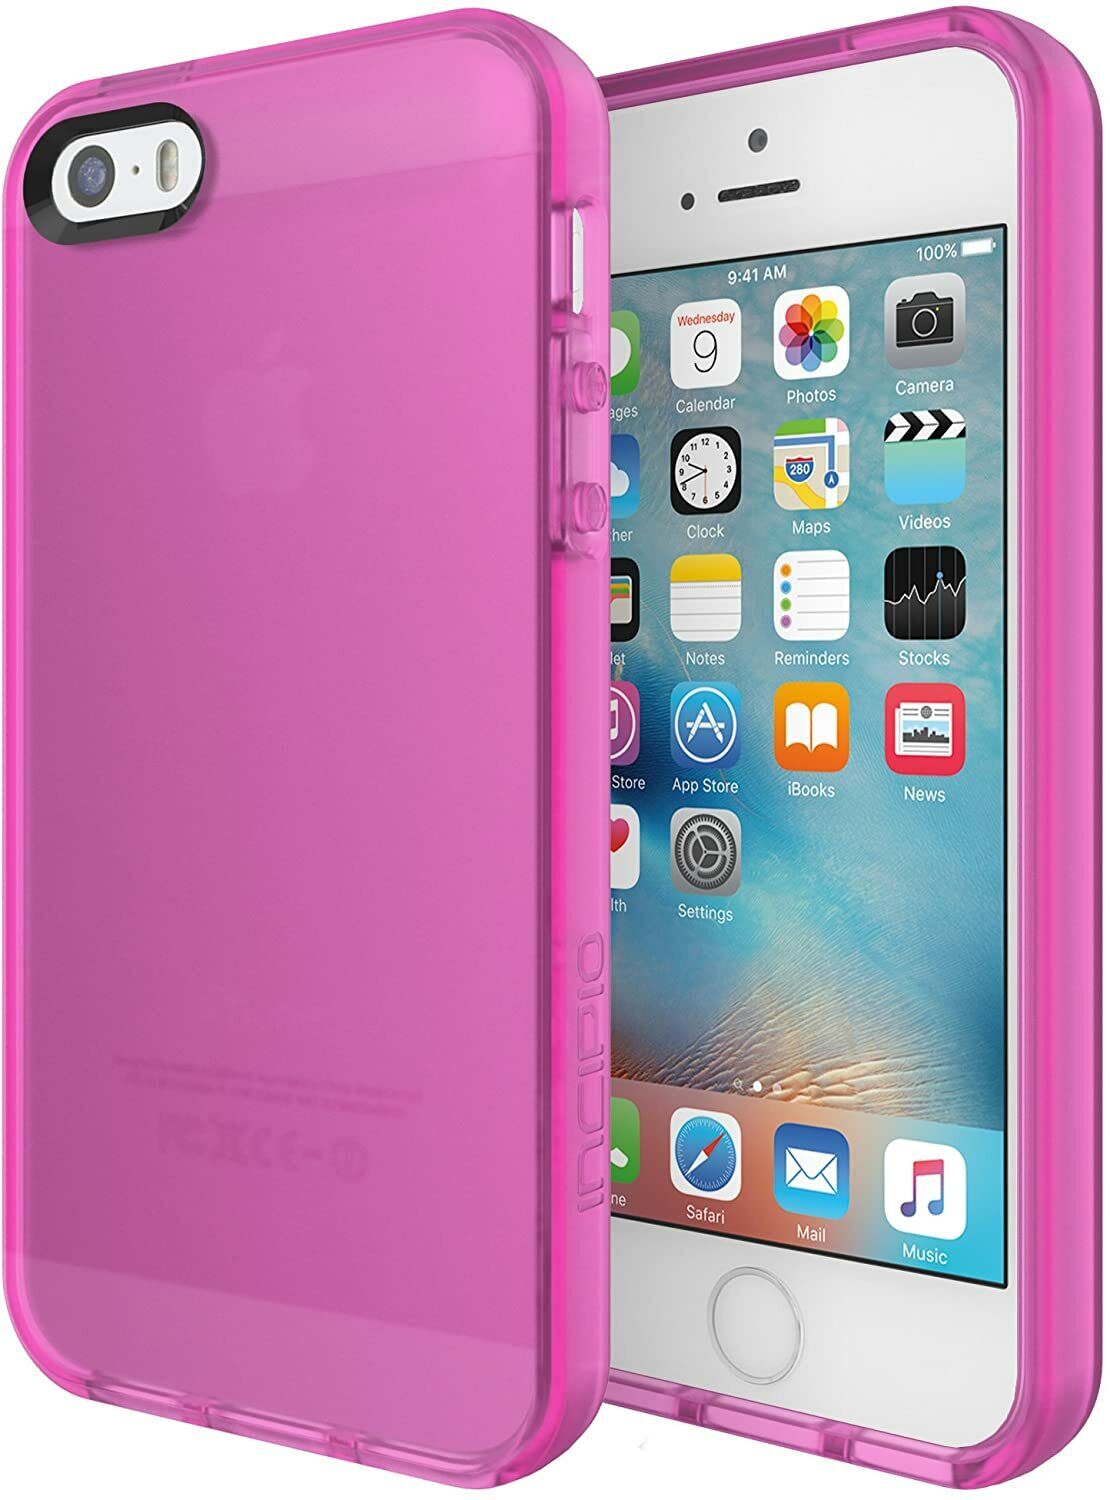 Incipio NGP Case for iPhone 5/5s/SE Translucent Pink LOT OF 5 RETAIL PACKAGEING Incipio Does Not Apply